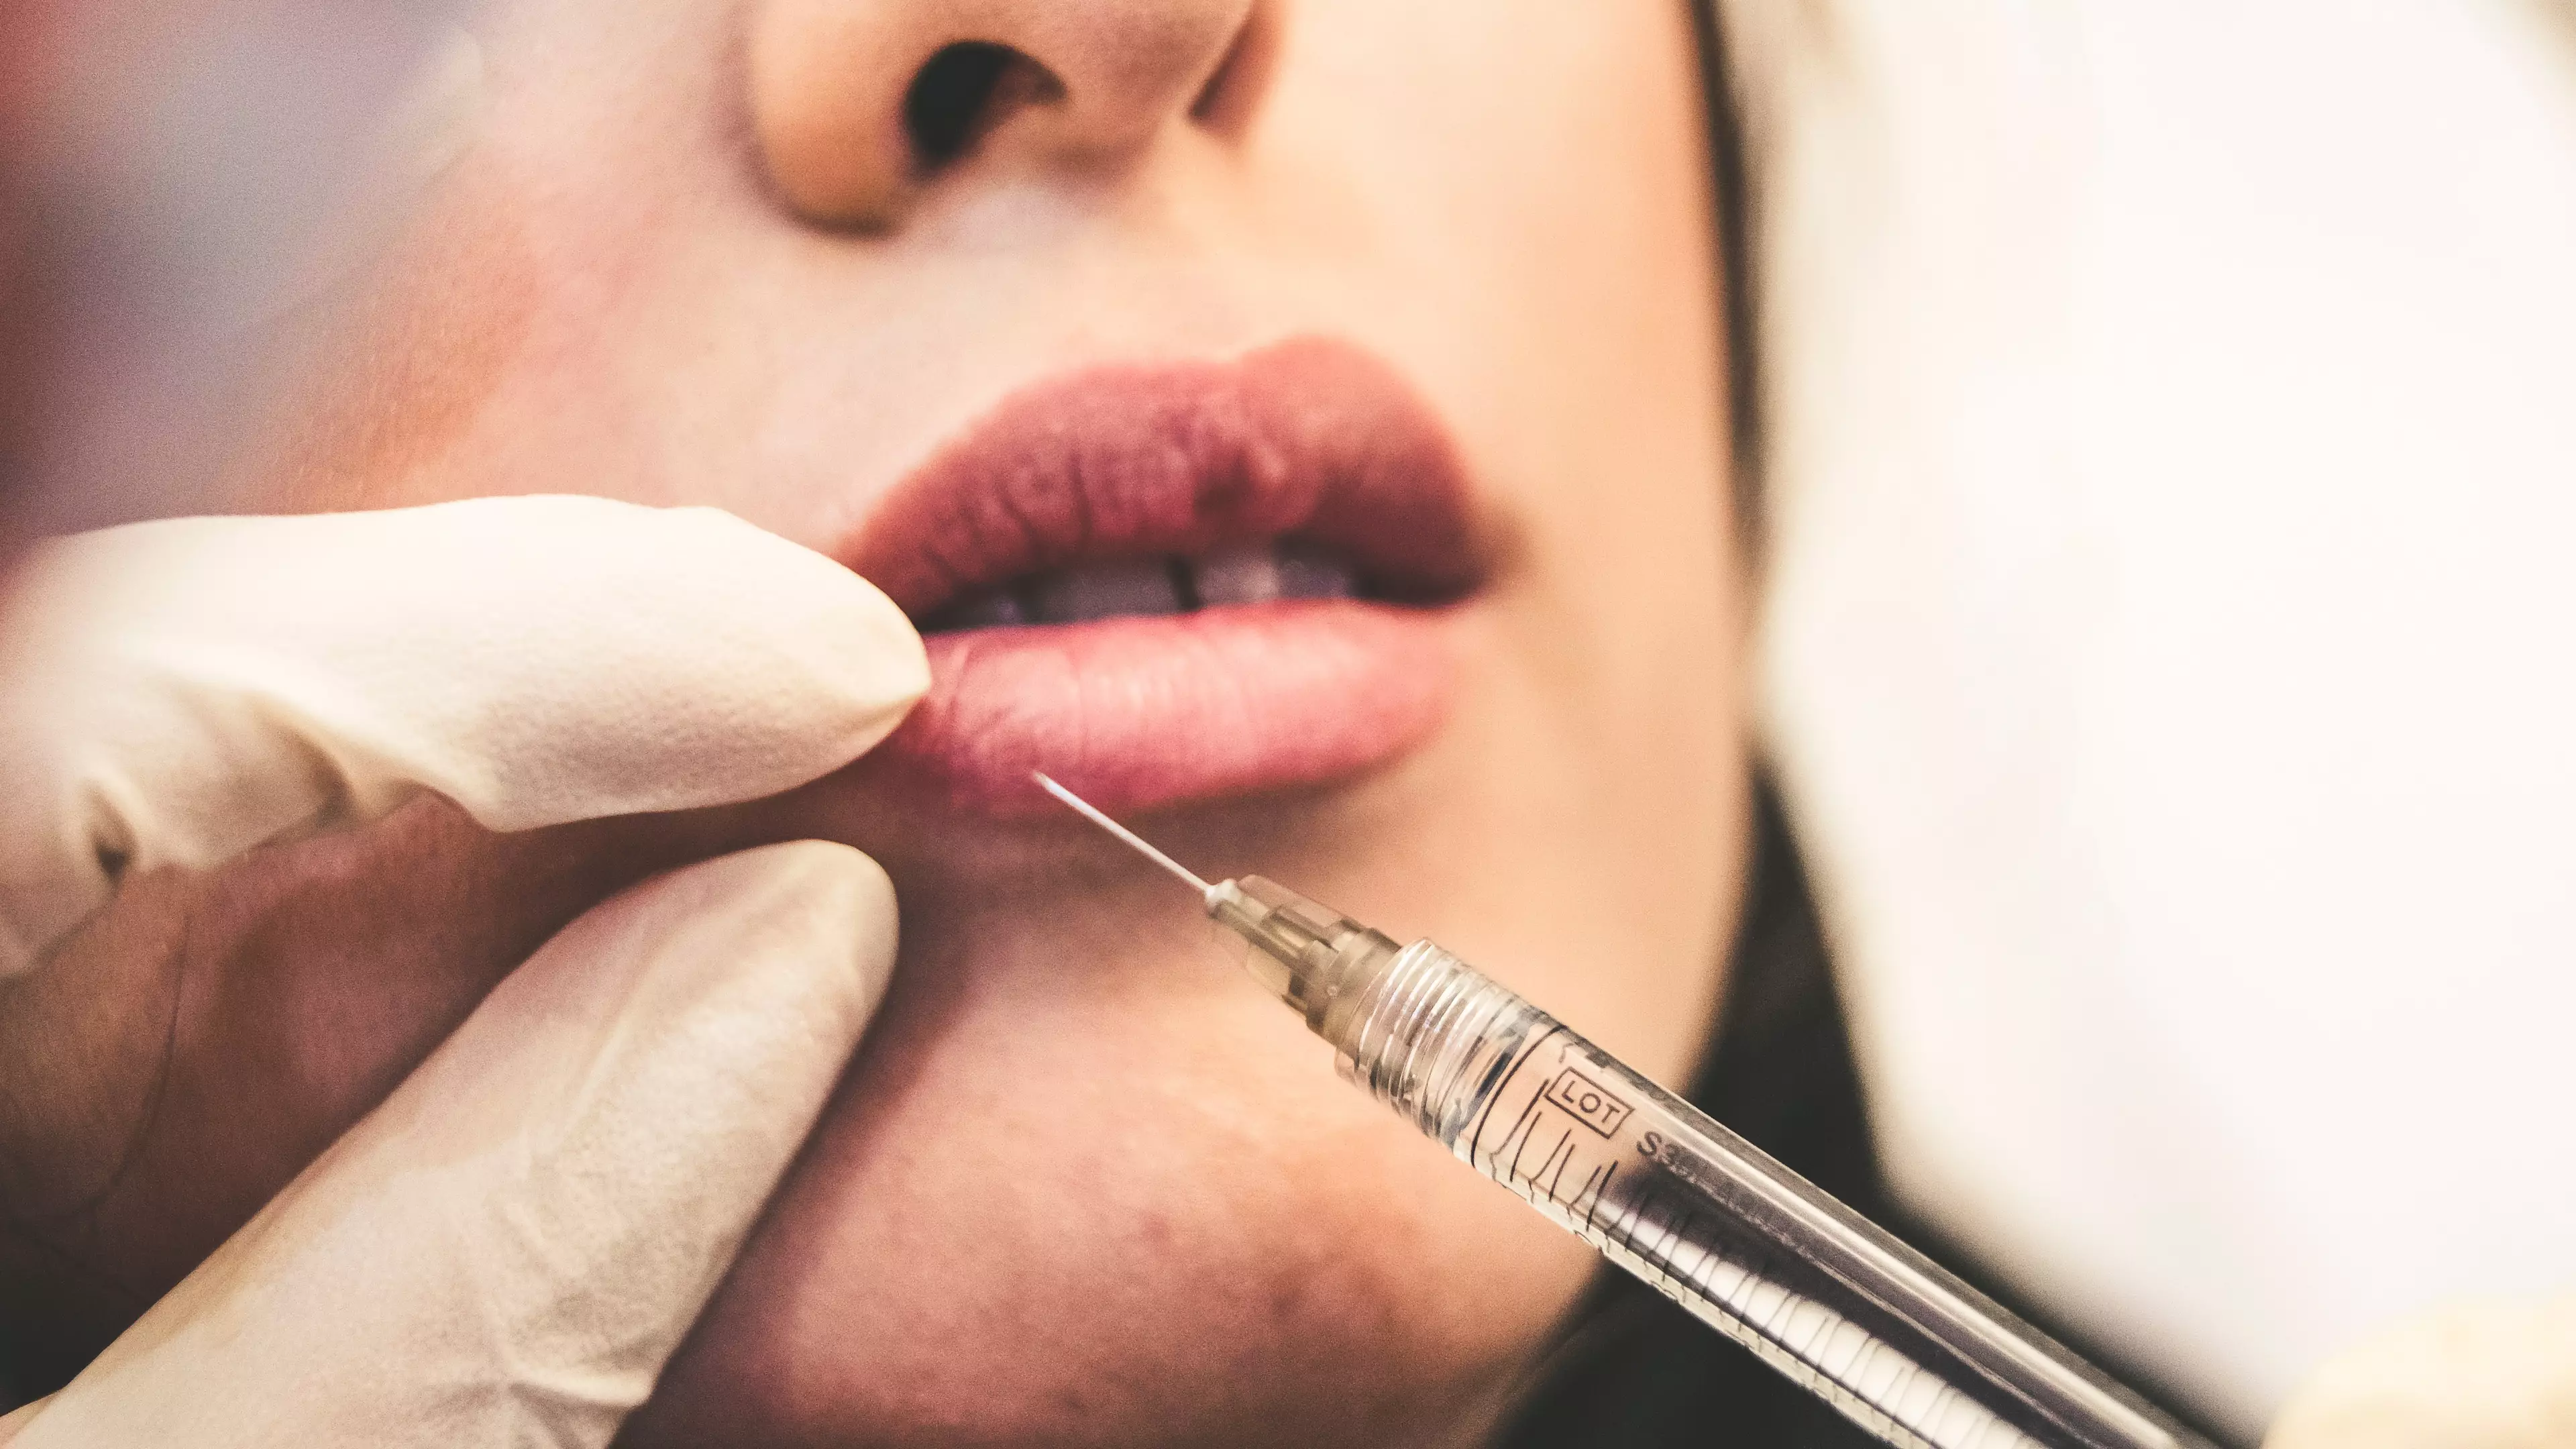 Only specific professionals will be able to administer the fillers if needed medically (